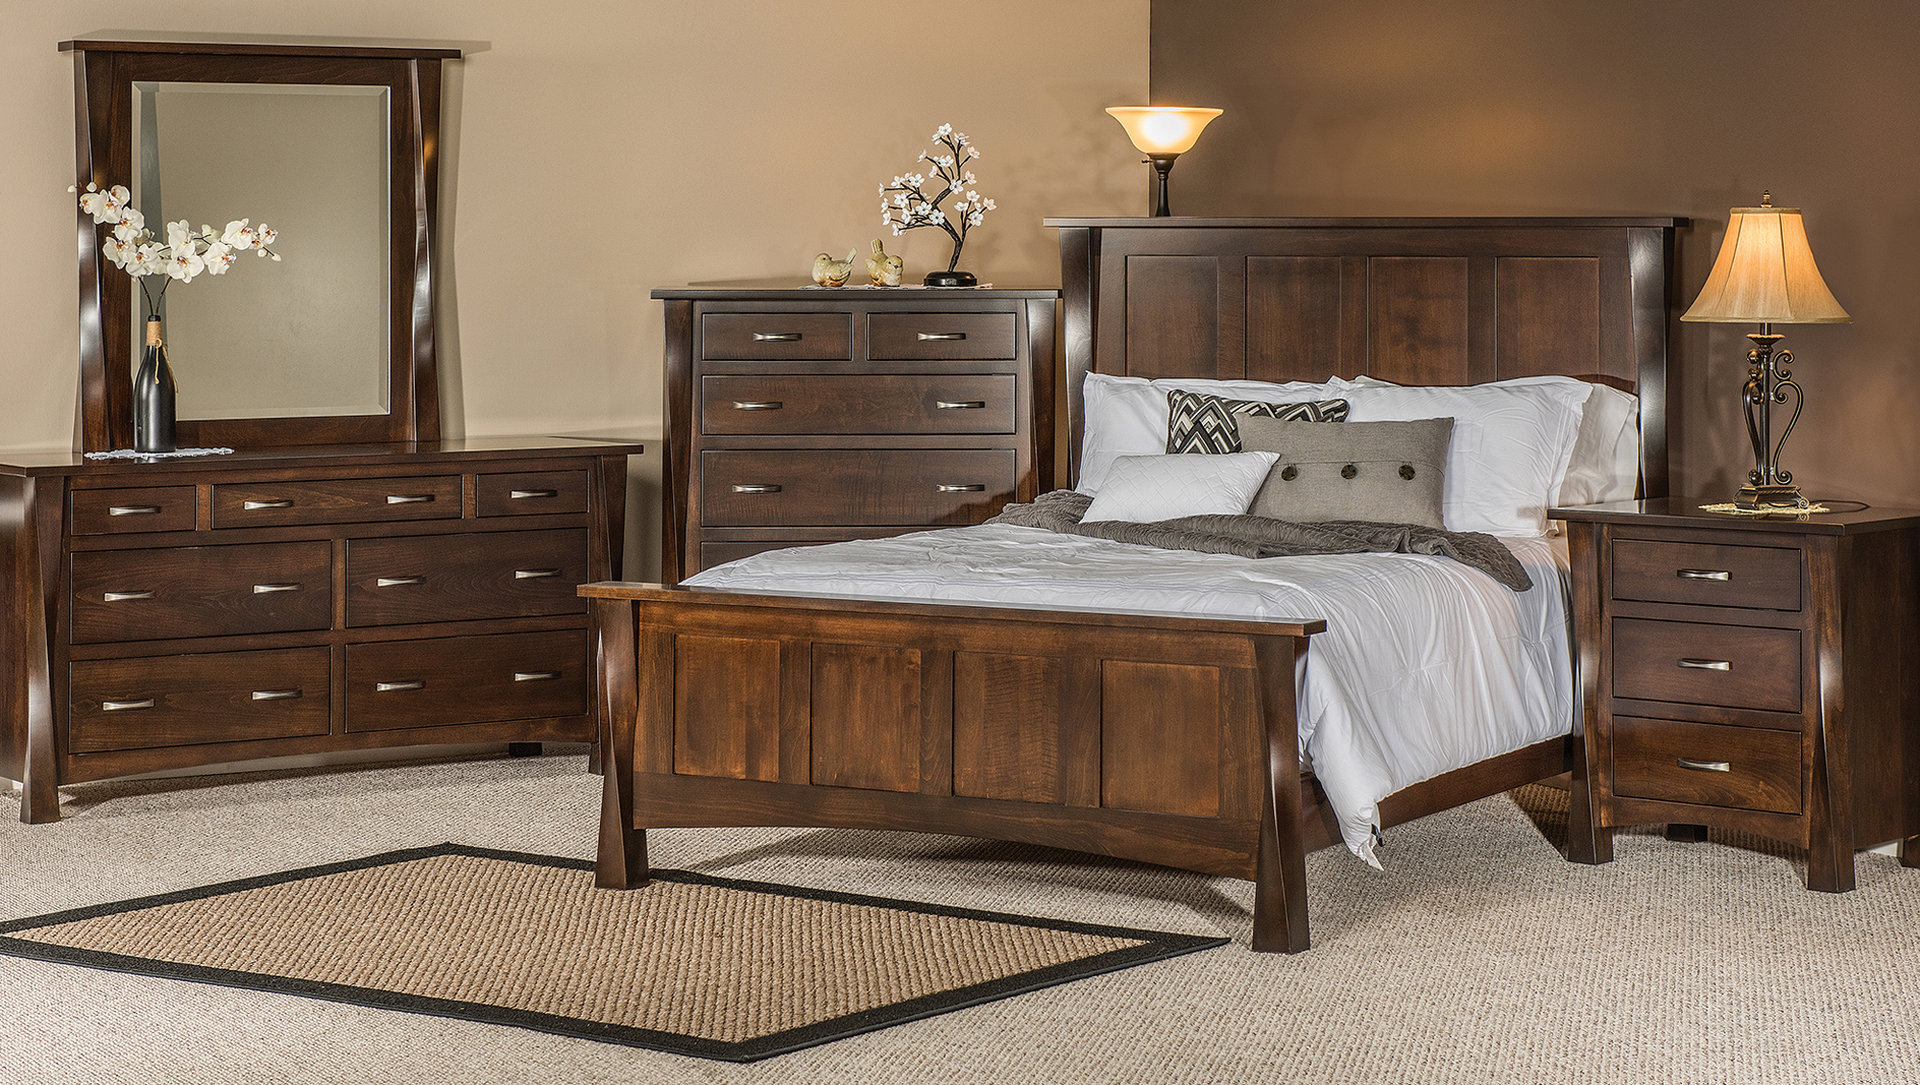 lexington bedroom furniture collections